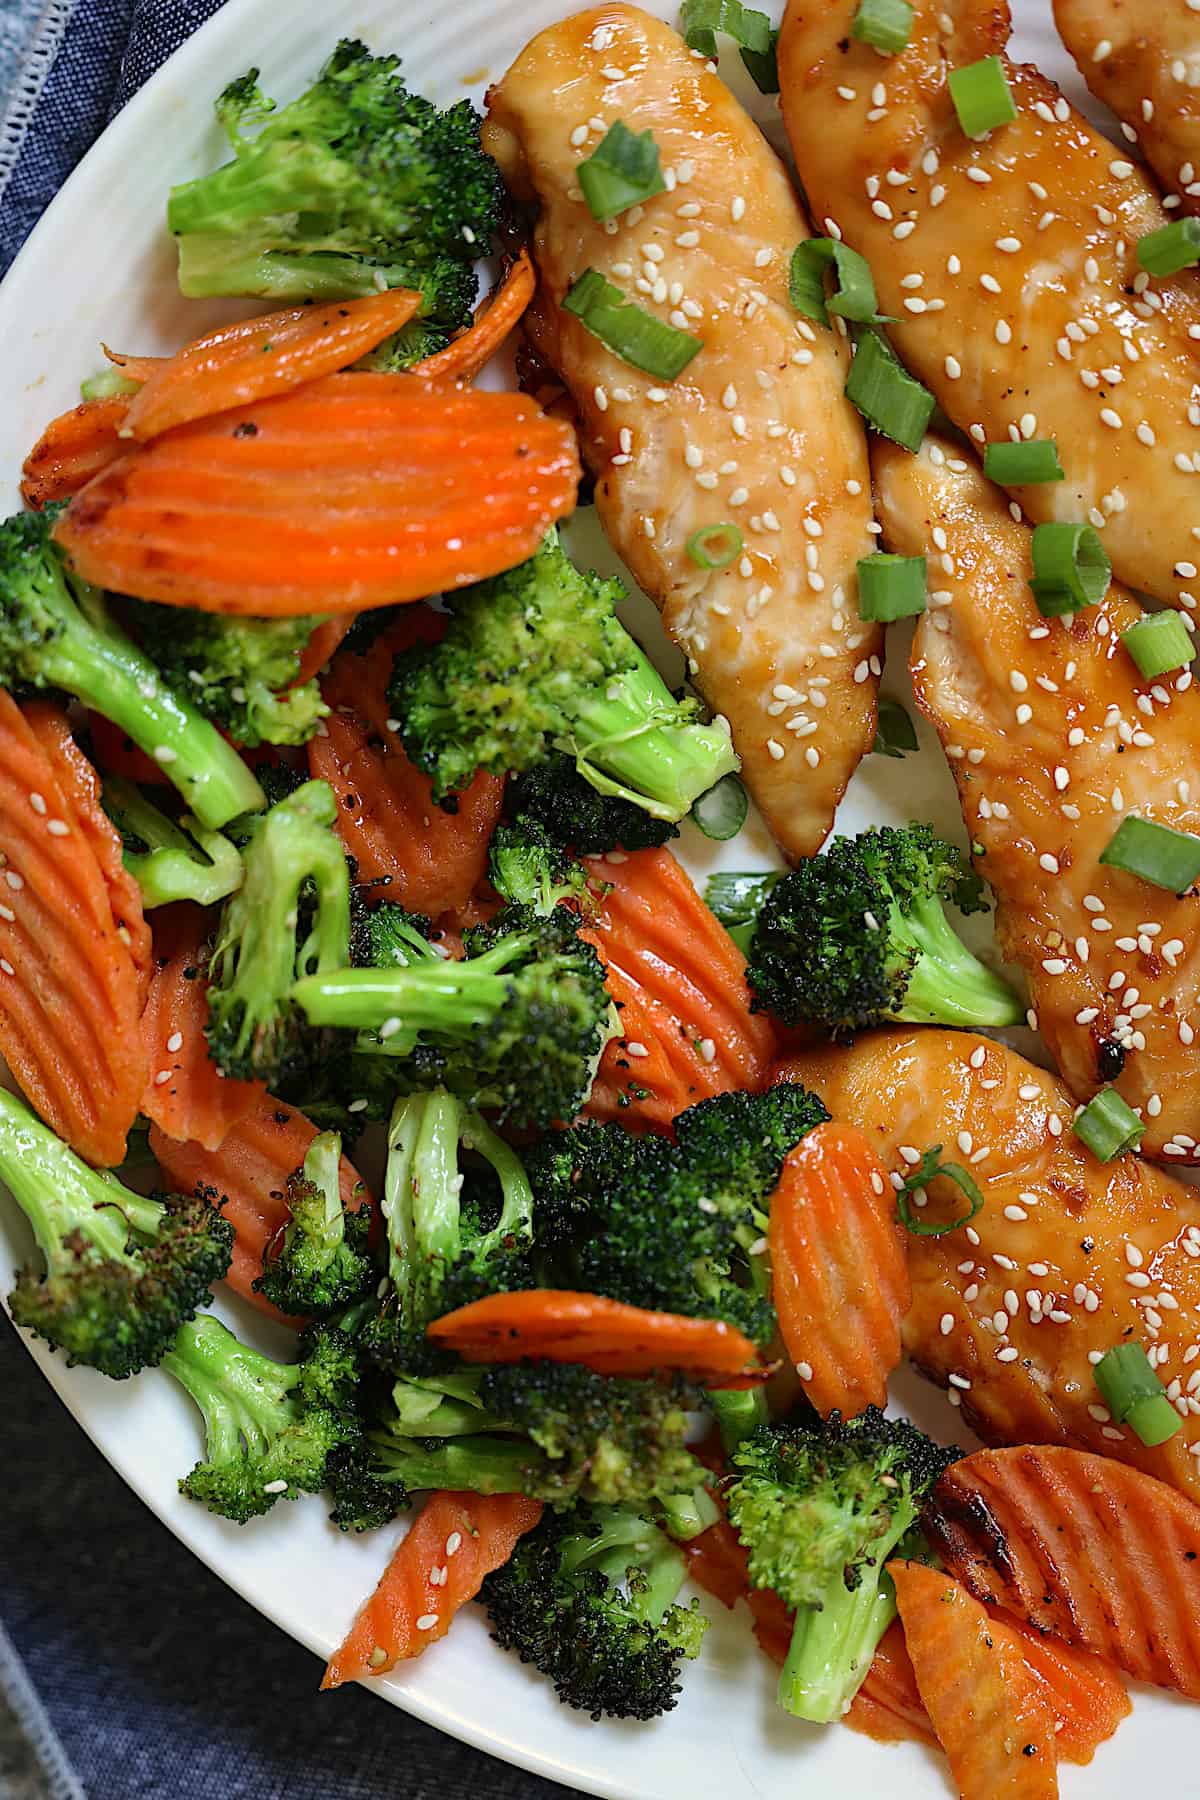 carrots, broccoli and teriyaki chicken on a white plate